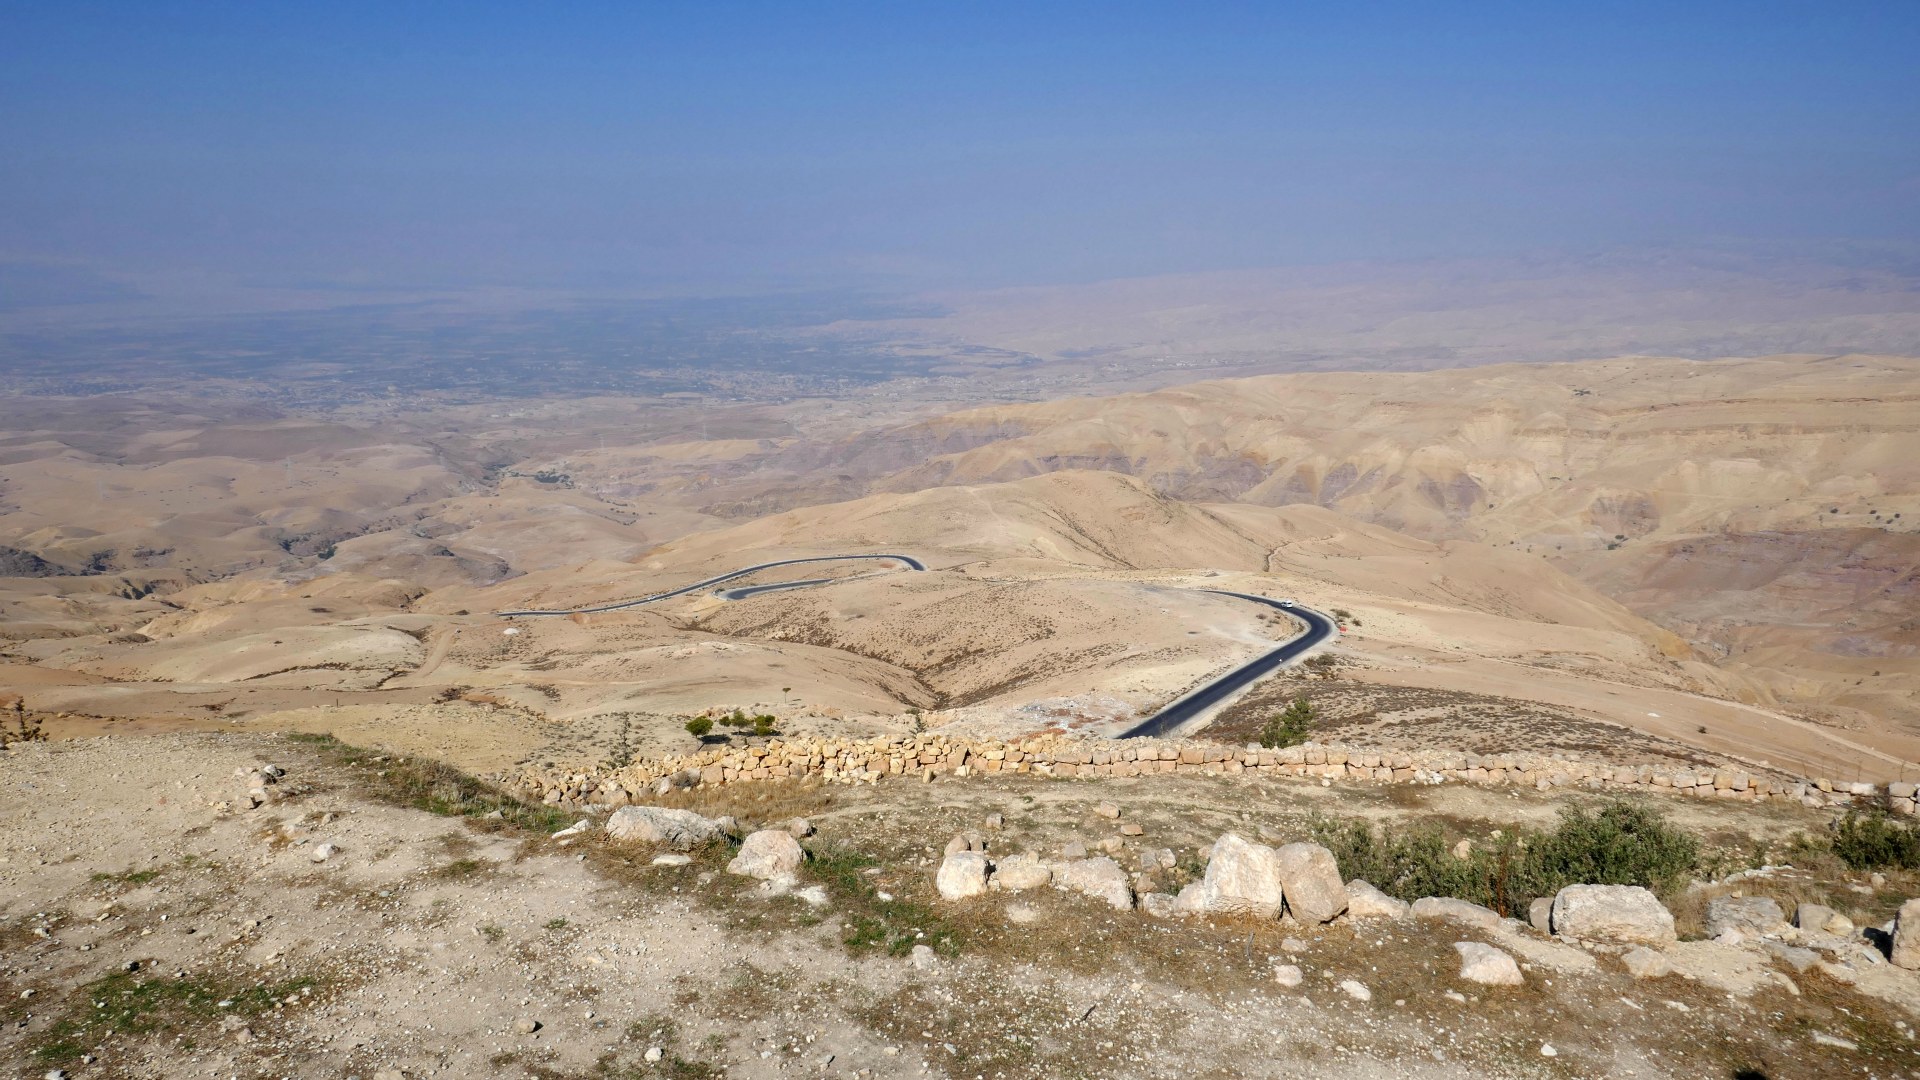 View from Mount Nebo